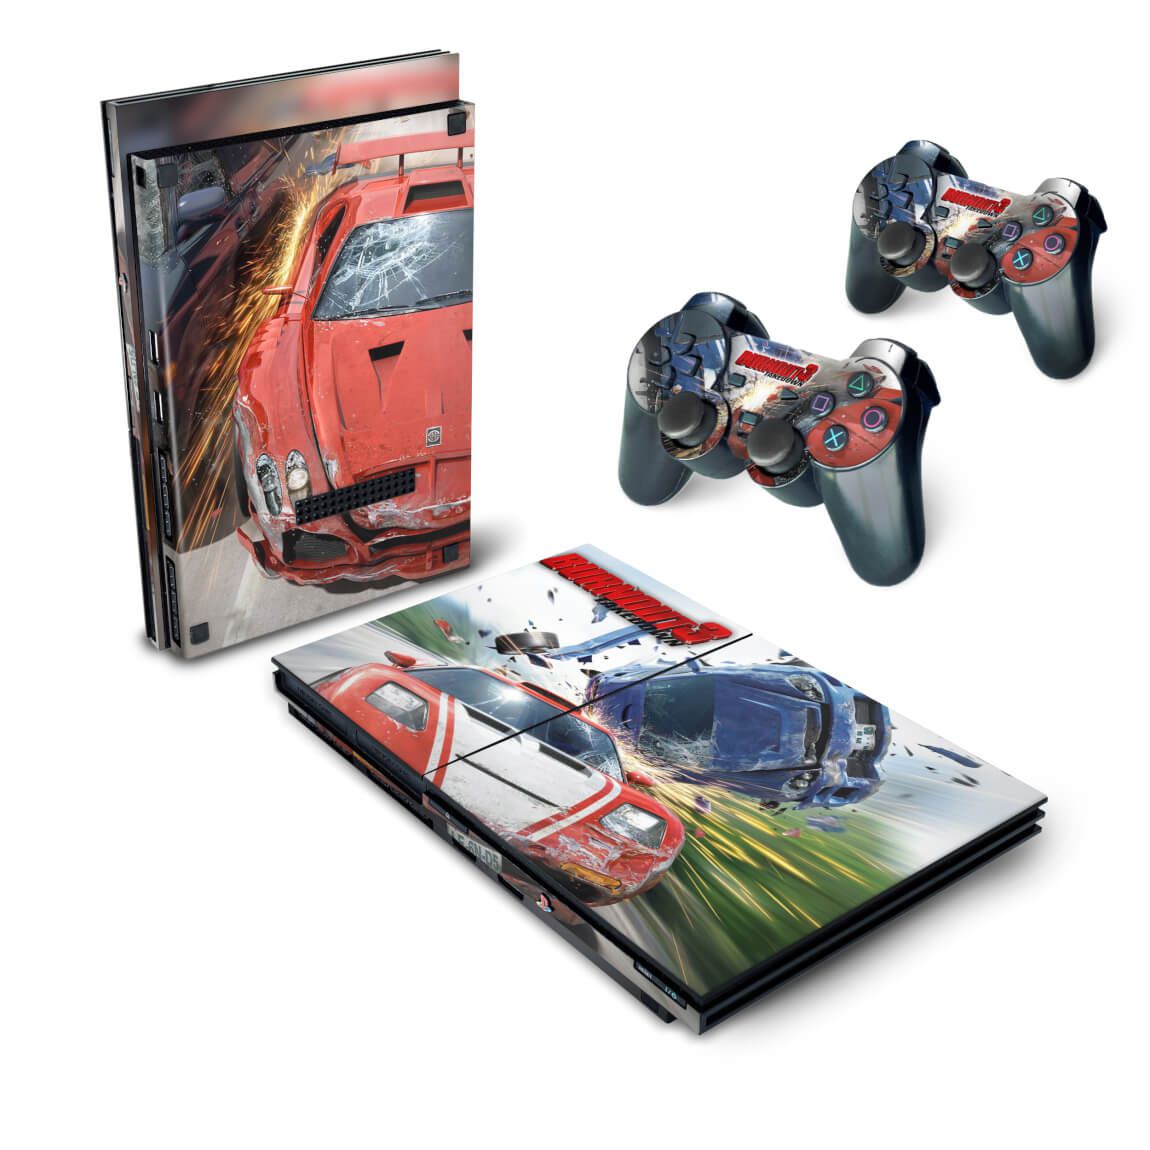 Capa PS4 Controle Case - Need For Speed Rivals - Pop Arte Skins